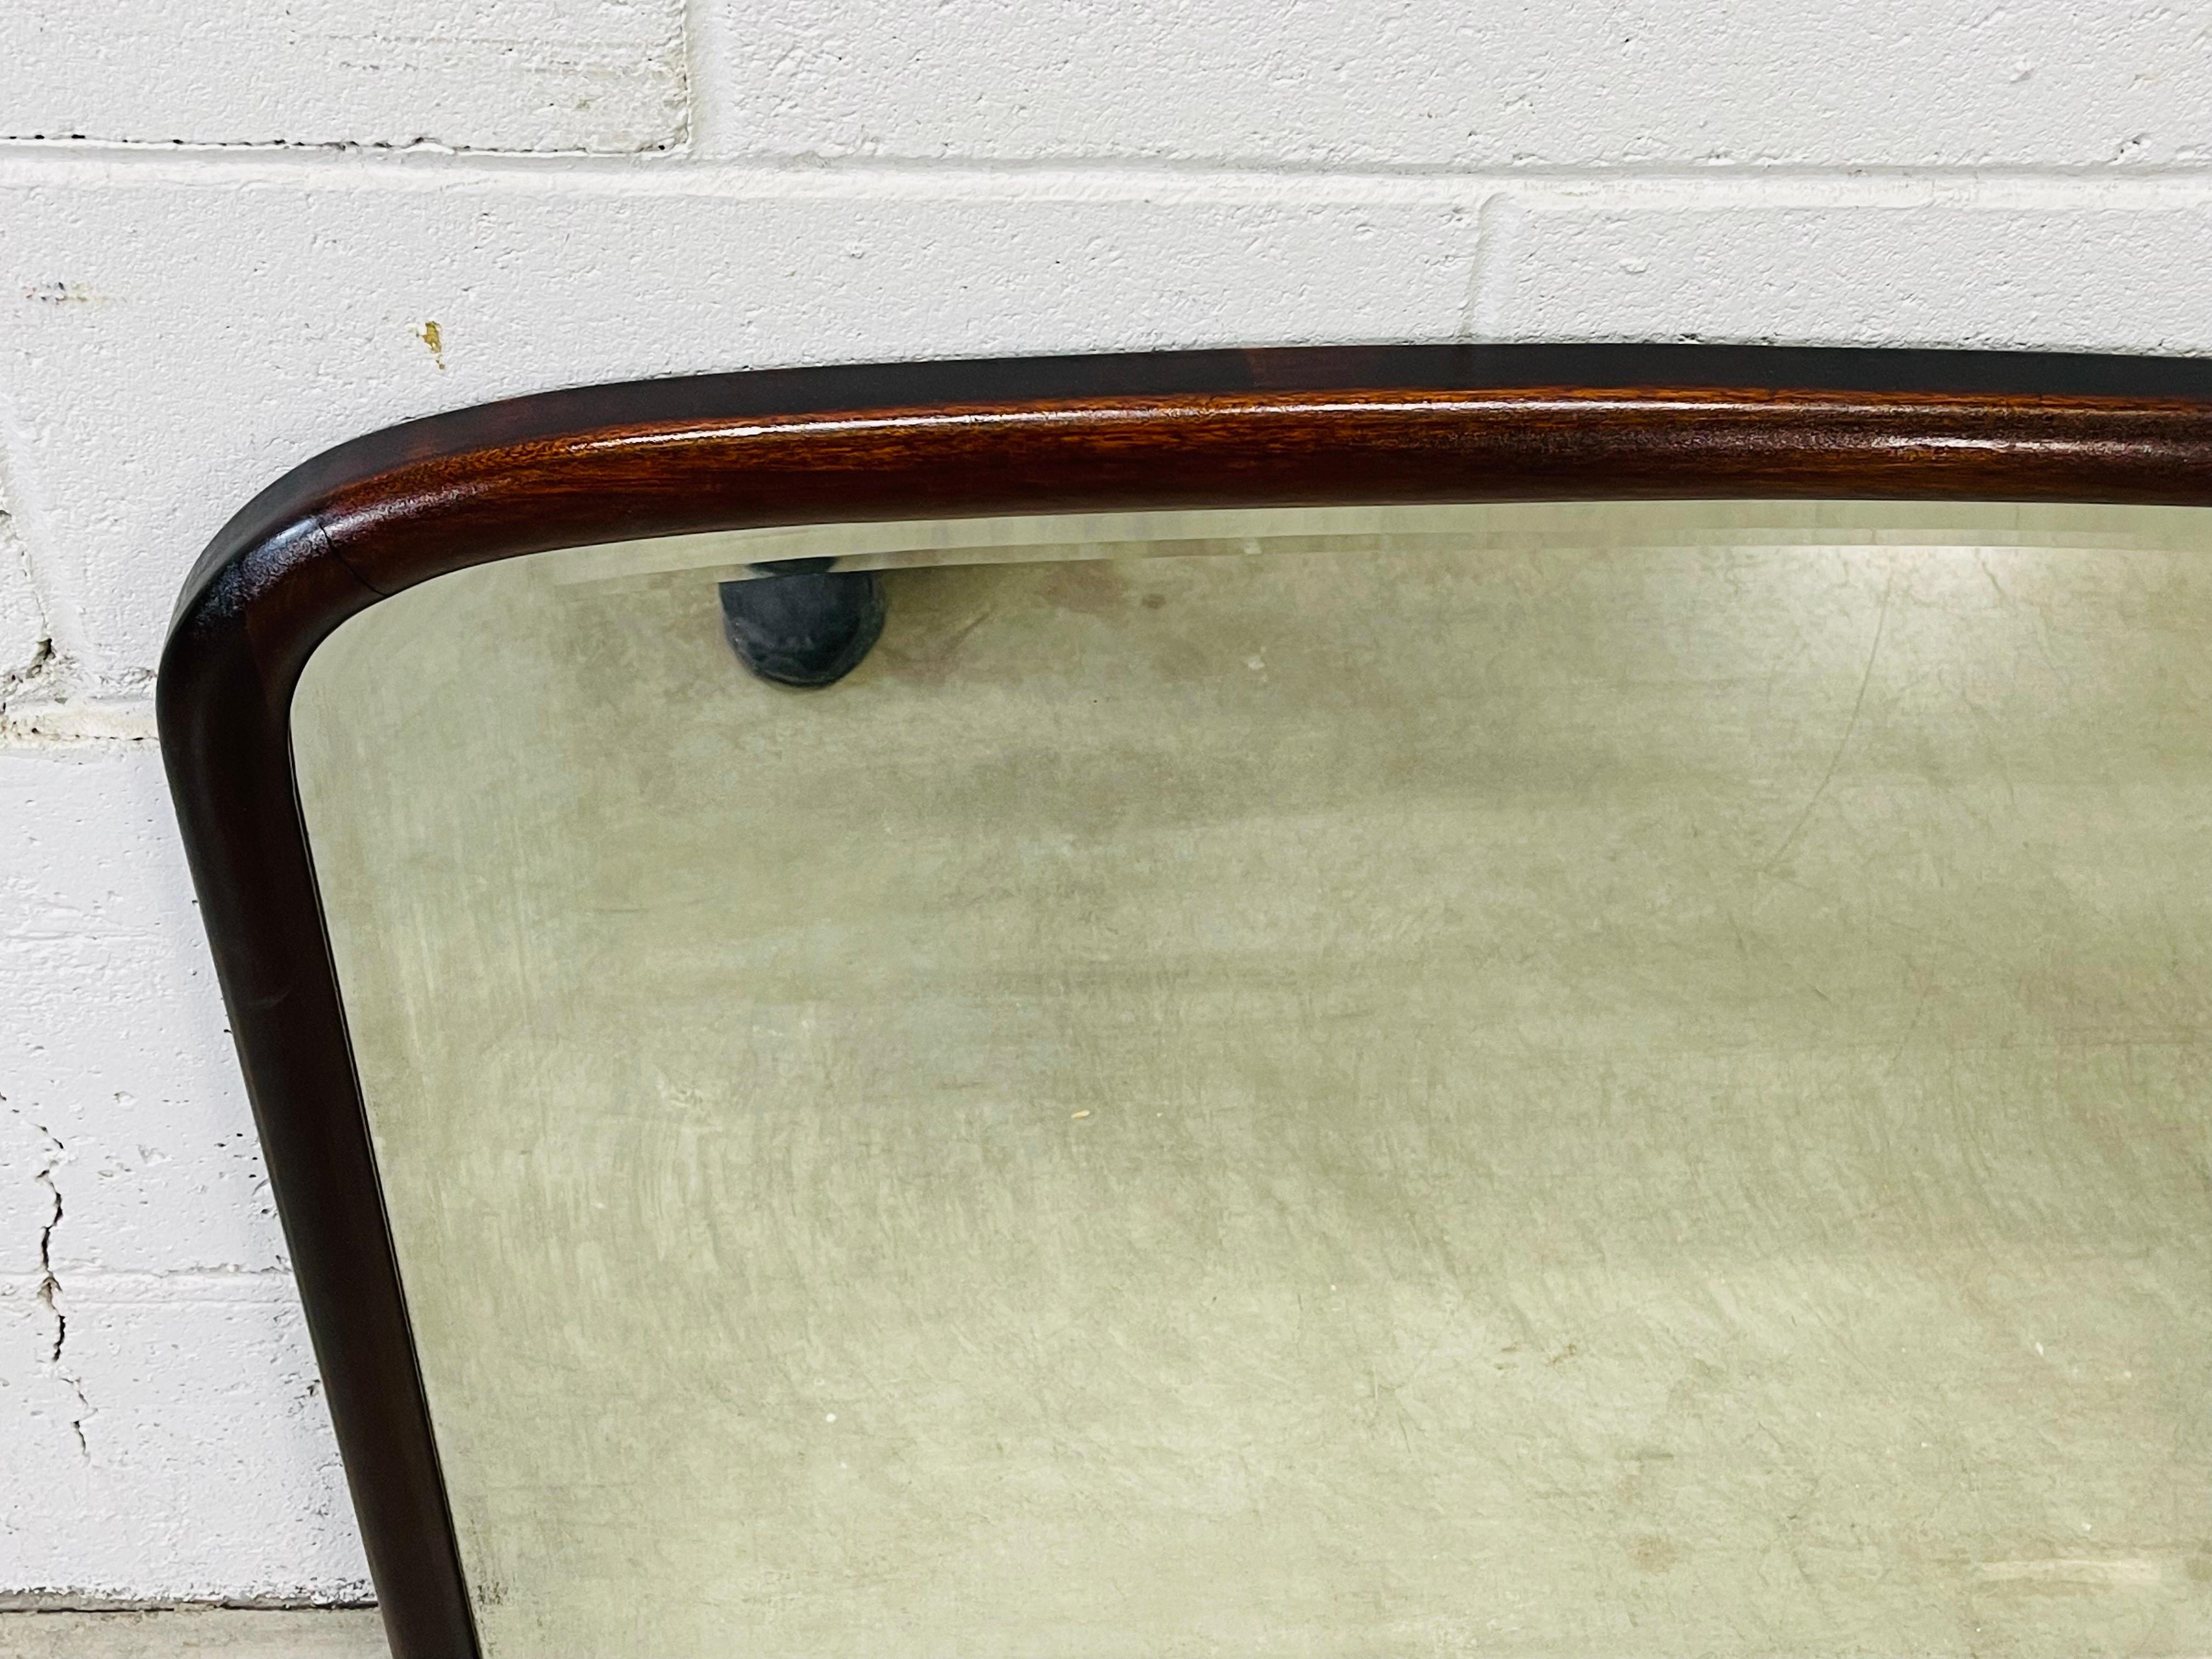 Vintage Art Deco mahogny rounded top wall mirror with a beveled edge. The wood frame is newly refinished. The mirror has a light haze from age. No marks and no hardware is included.